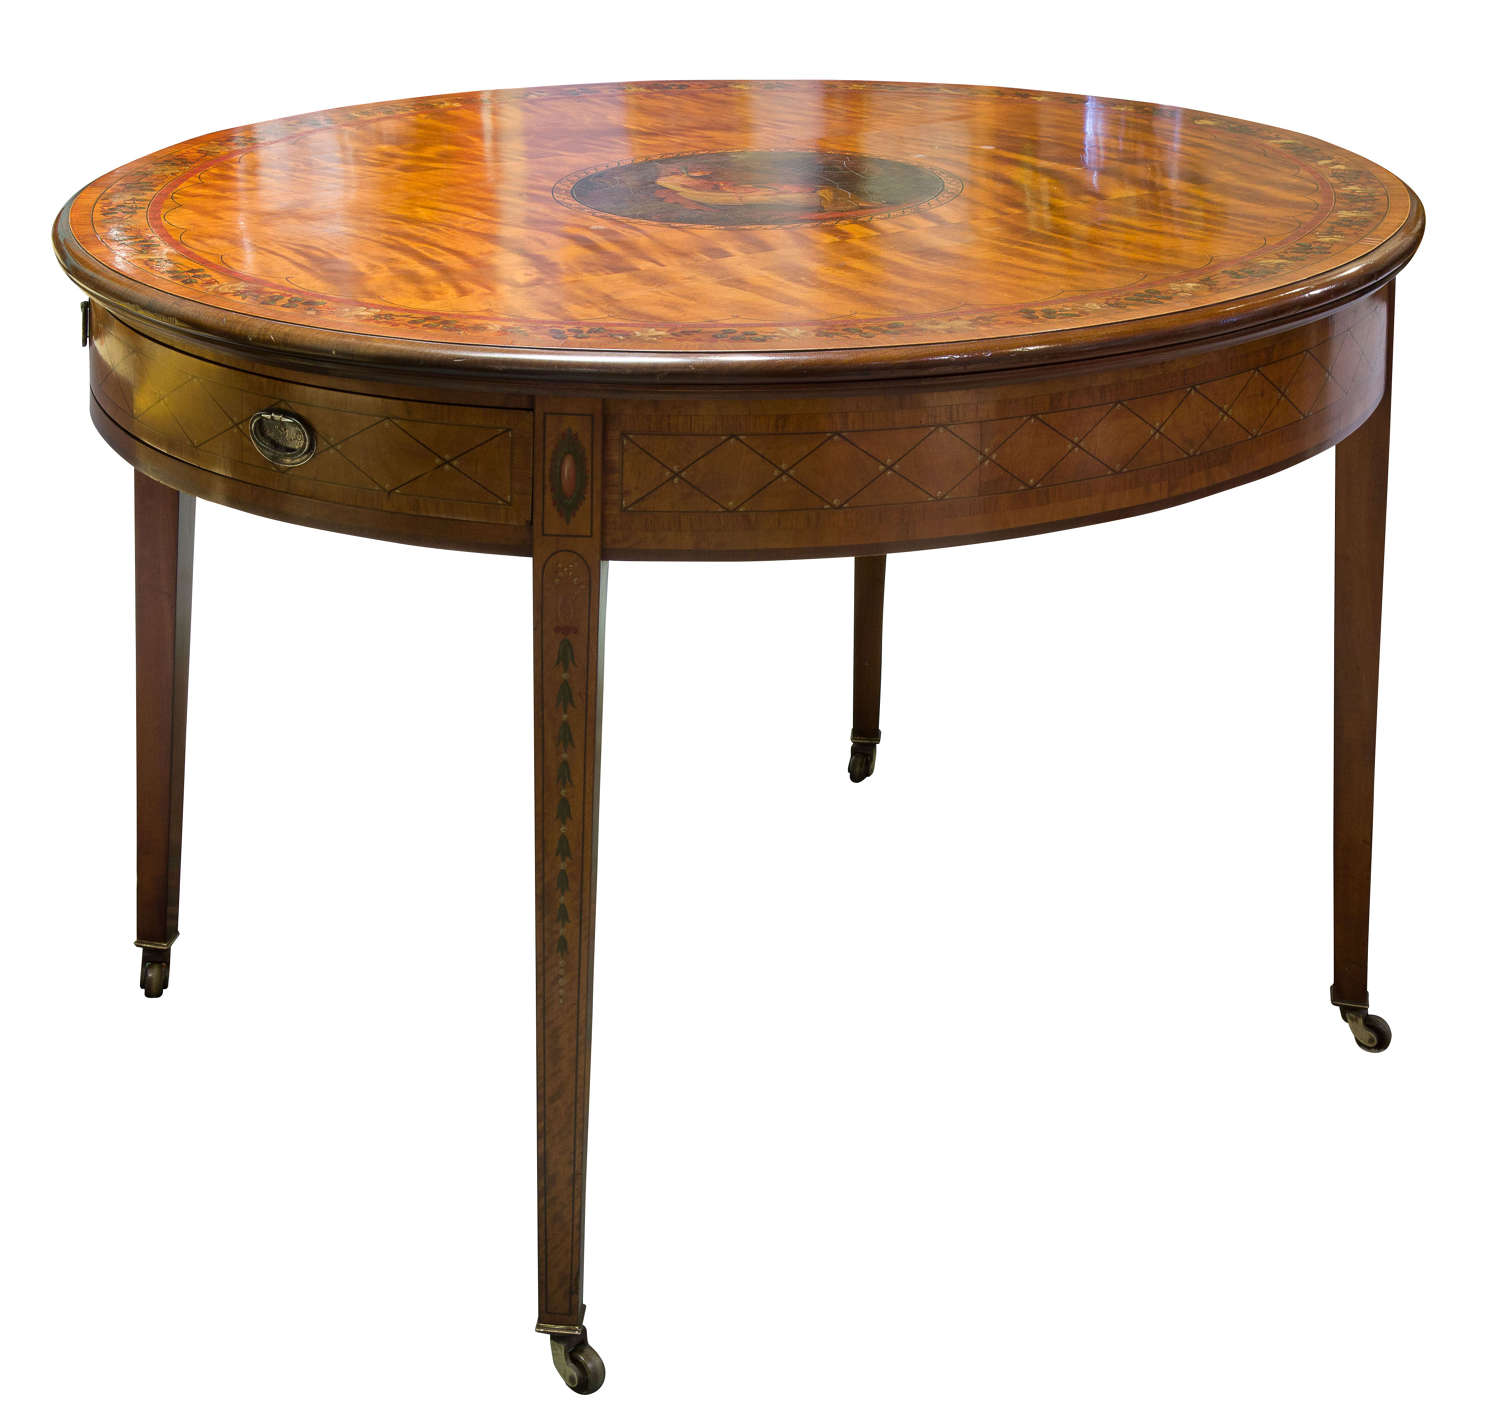 Painted satinwood oval centre table circa 1890